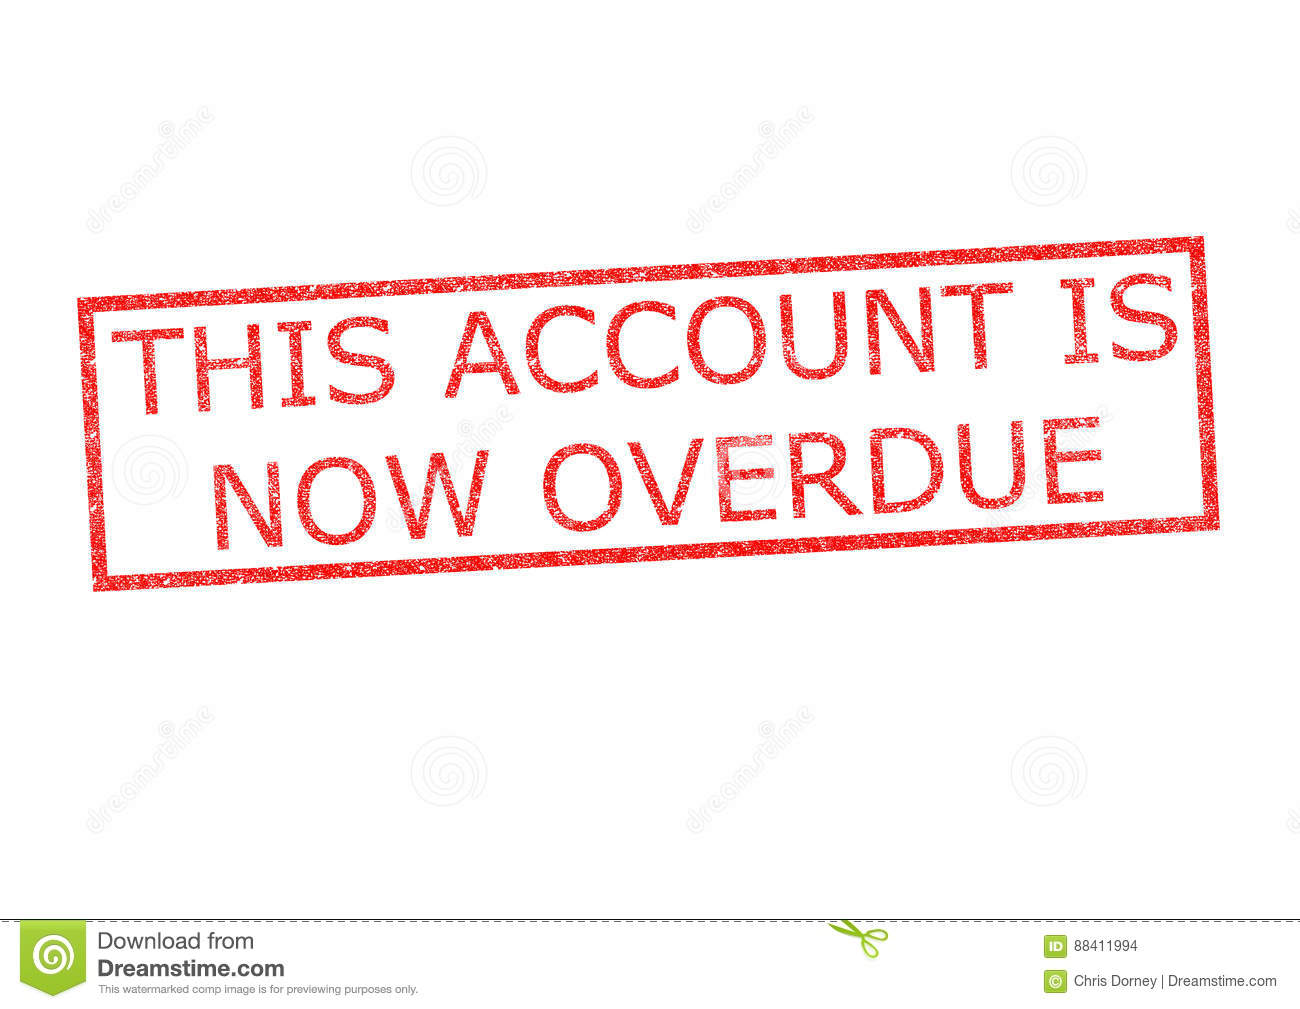 account-now-overdue-stamp-rubber-over-white-background-88411994.jpg